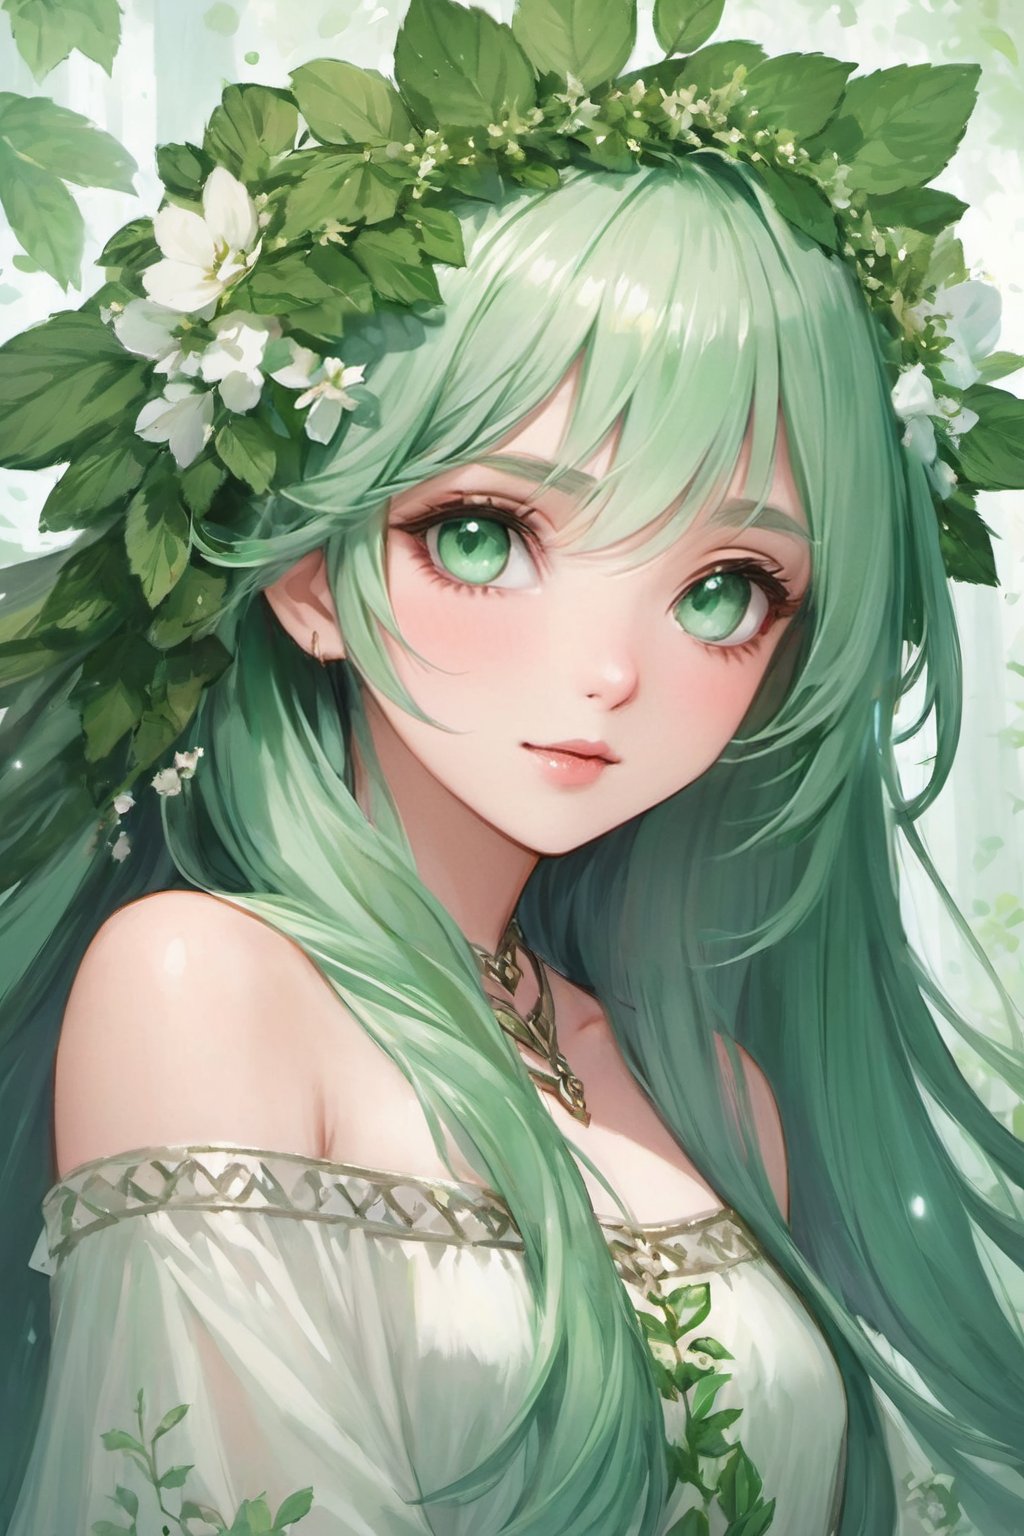 portrait, solo, upper body, looking at viewer, detailed background, detailed face, 1girl, nymph, ethereal, nature-inspired, almond-shaped face shape, emerald eye color, cascading green-mint hair, leafy attire, floral crown, serene expression, mystical feeling of the image.